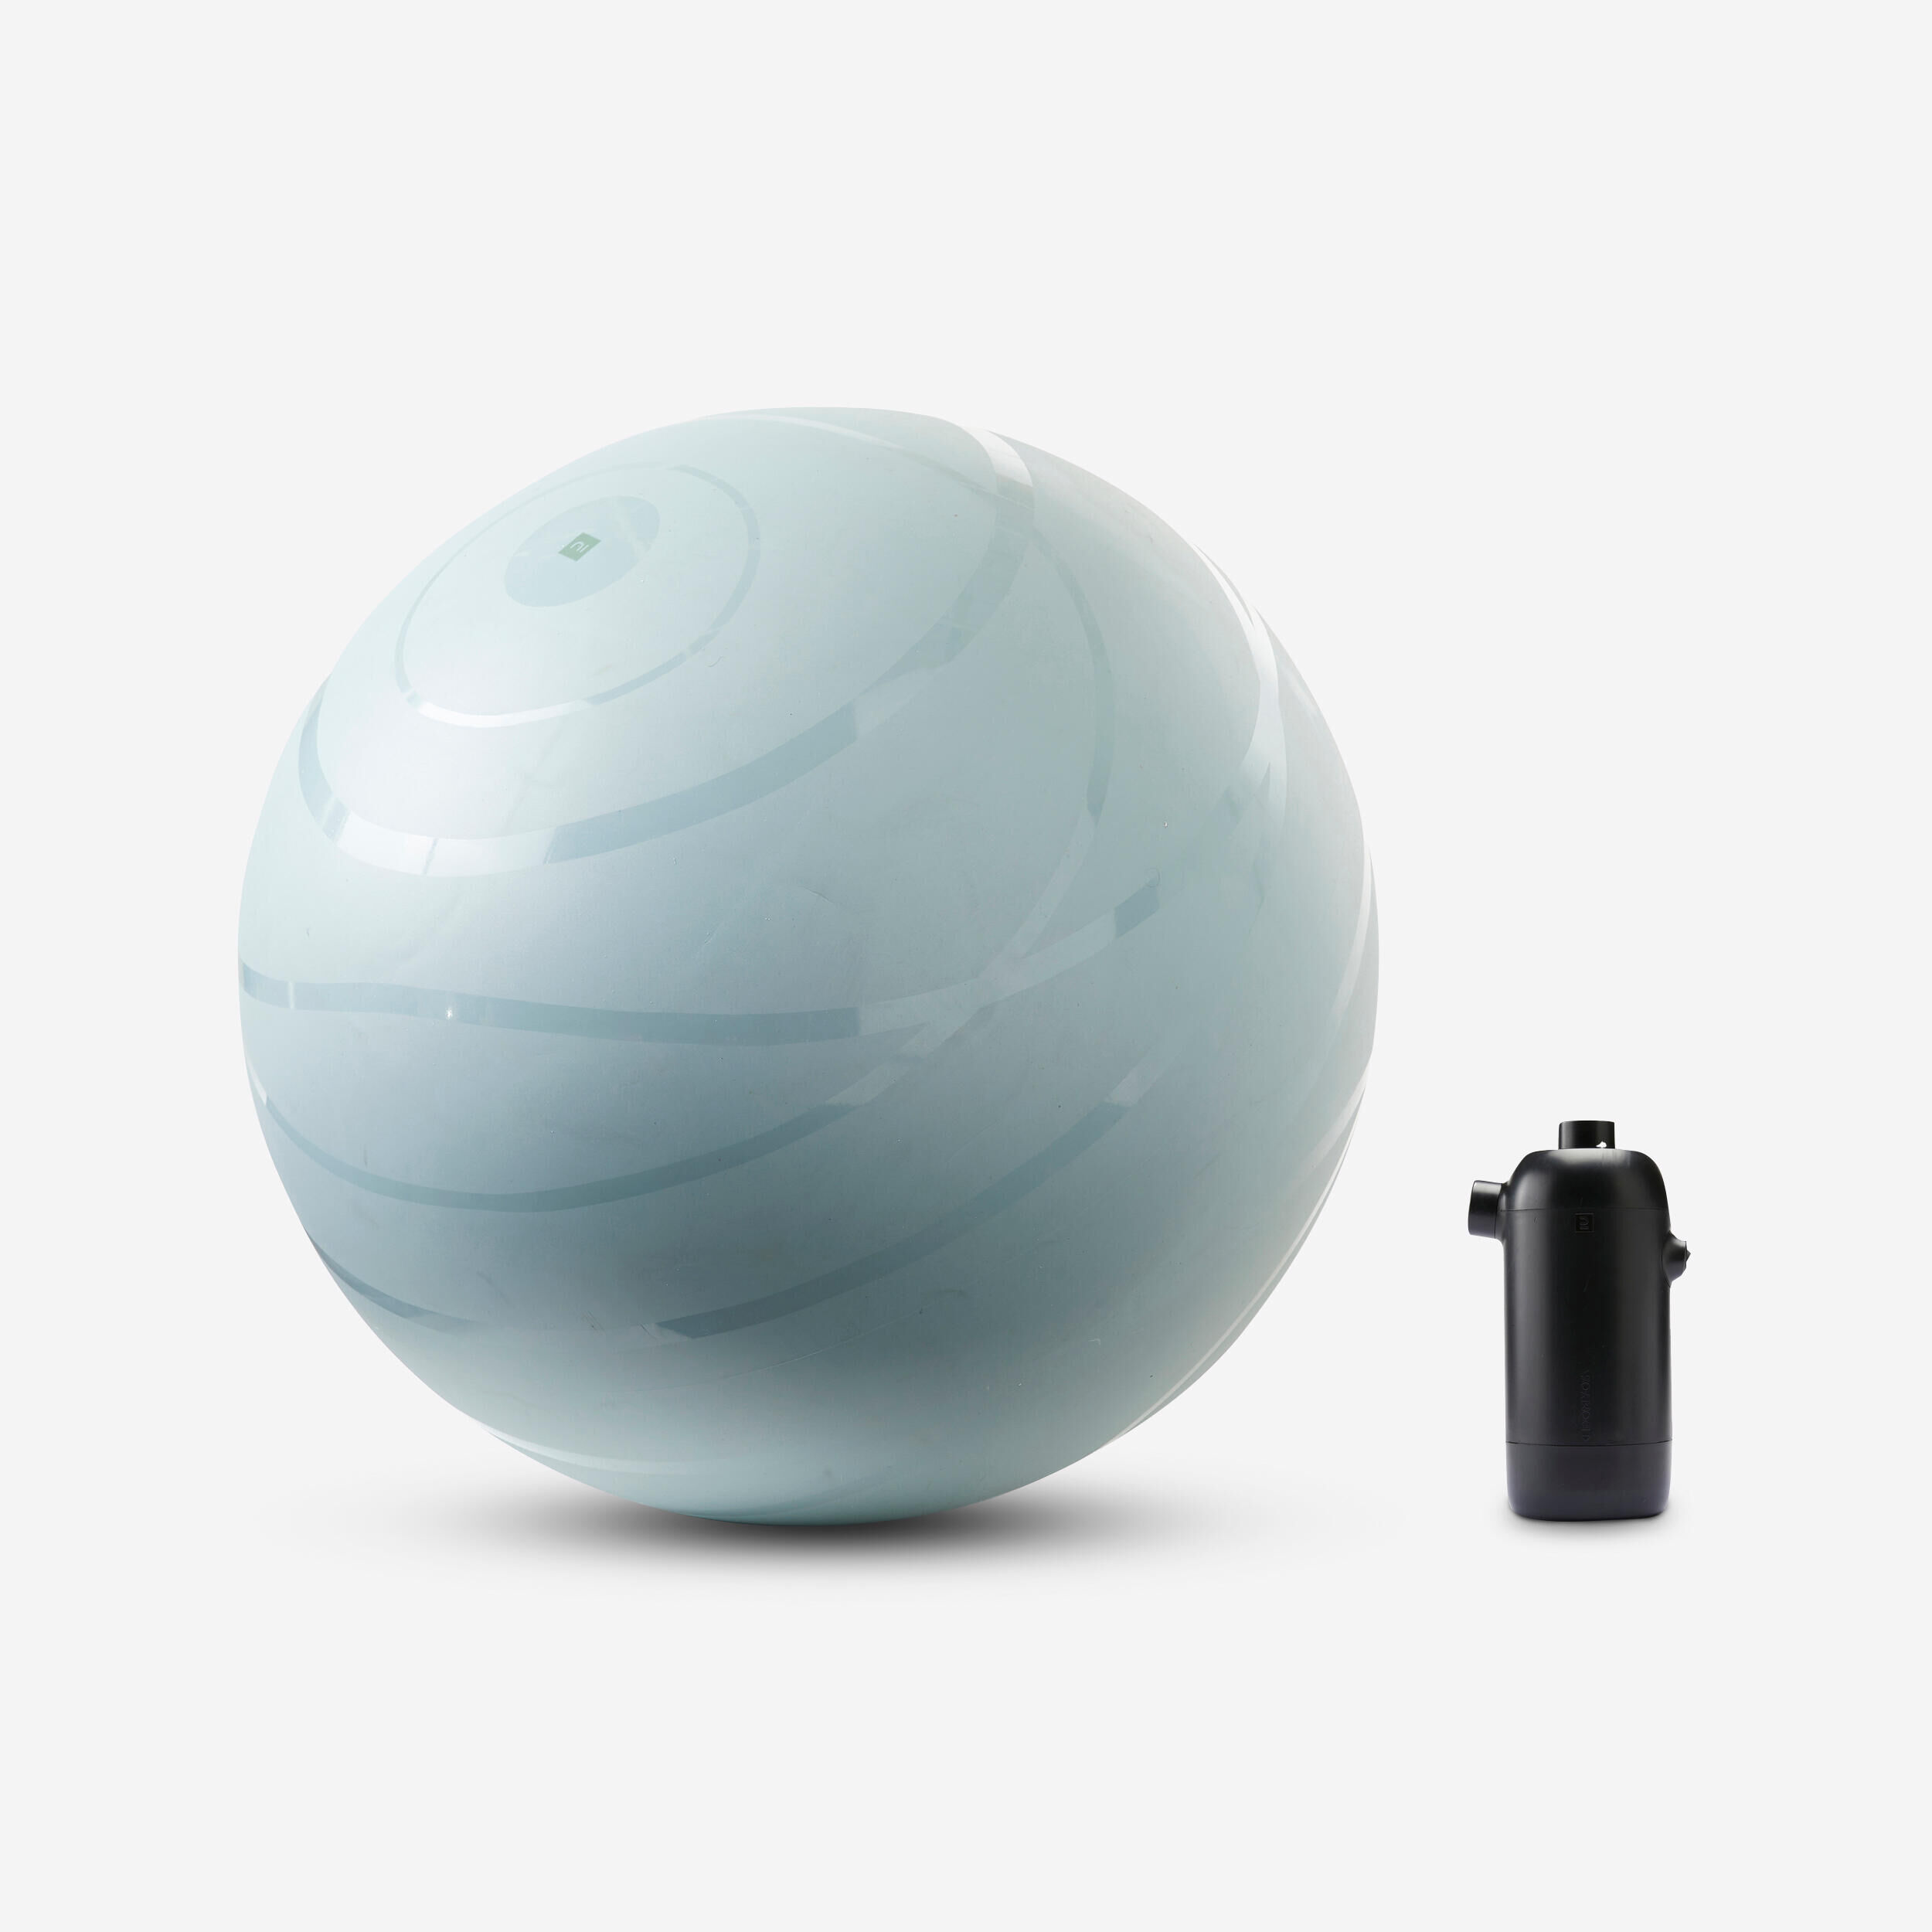 DOMYOS Gym Ball with Pump Included for Quick Inflation/Deflation Size 1/55 cm